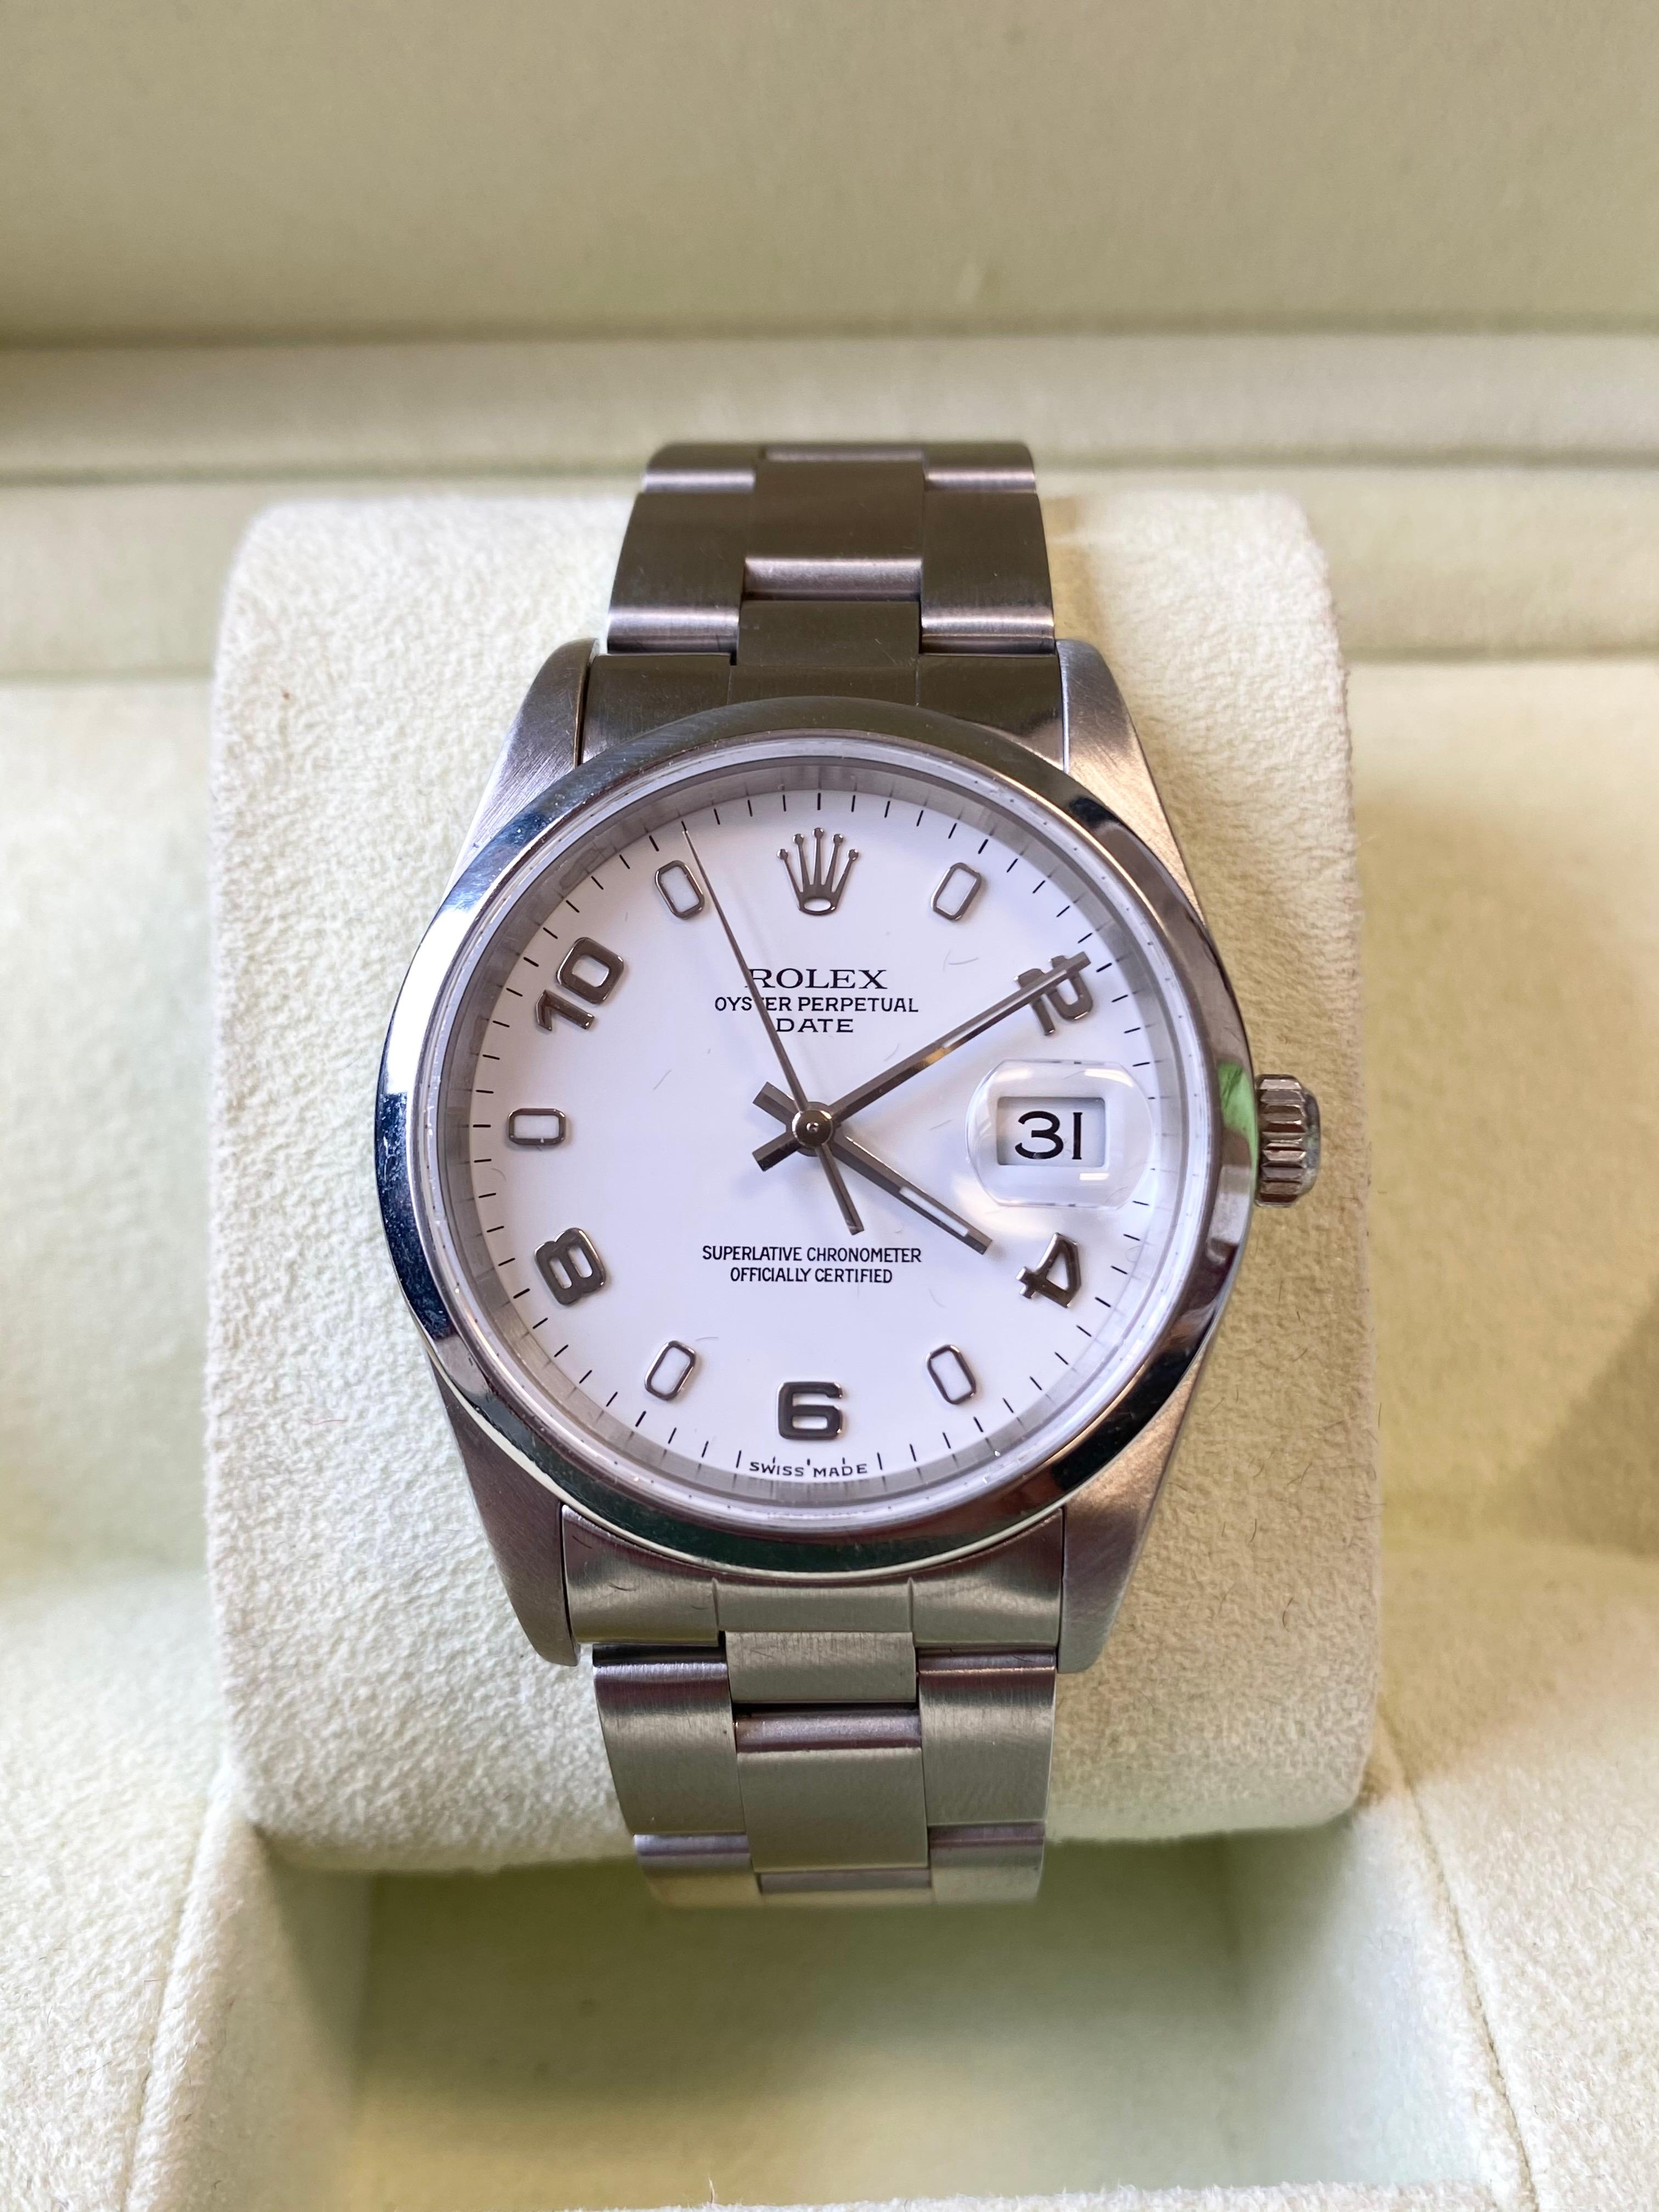 Rolex Oyster Perpetual wristwatch with smooth bezel and even-numbered hour markers. An extravagant, yet sleek watch that echoes a statement of refined taste and class. This remarkably versatile watch fits any occasion from casual to dressy. 

✔ Case